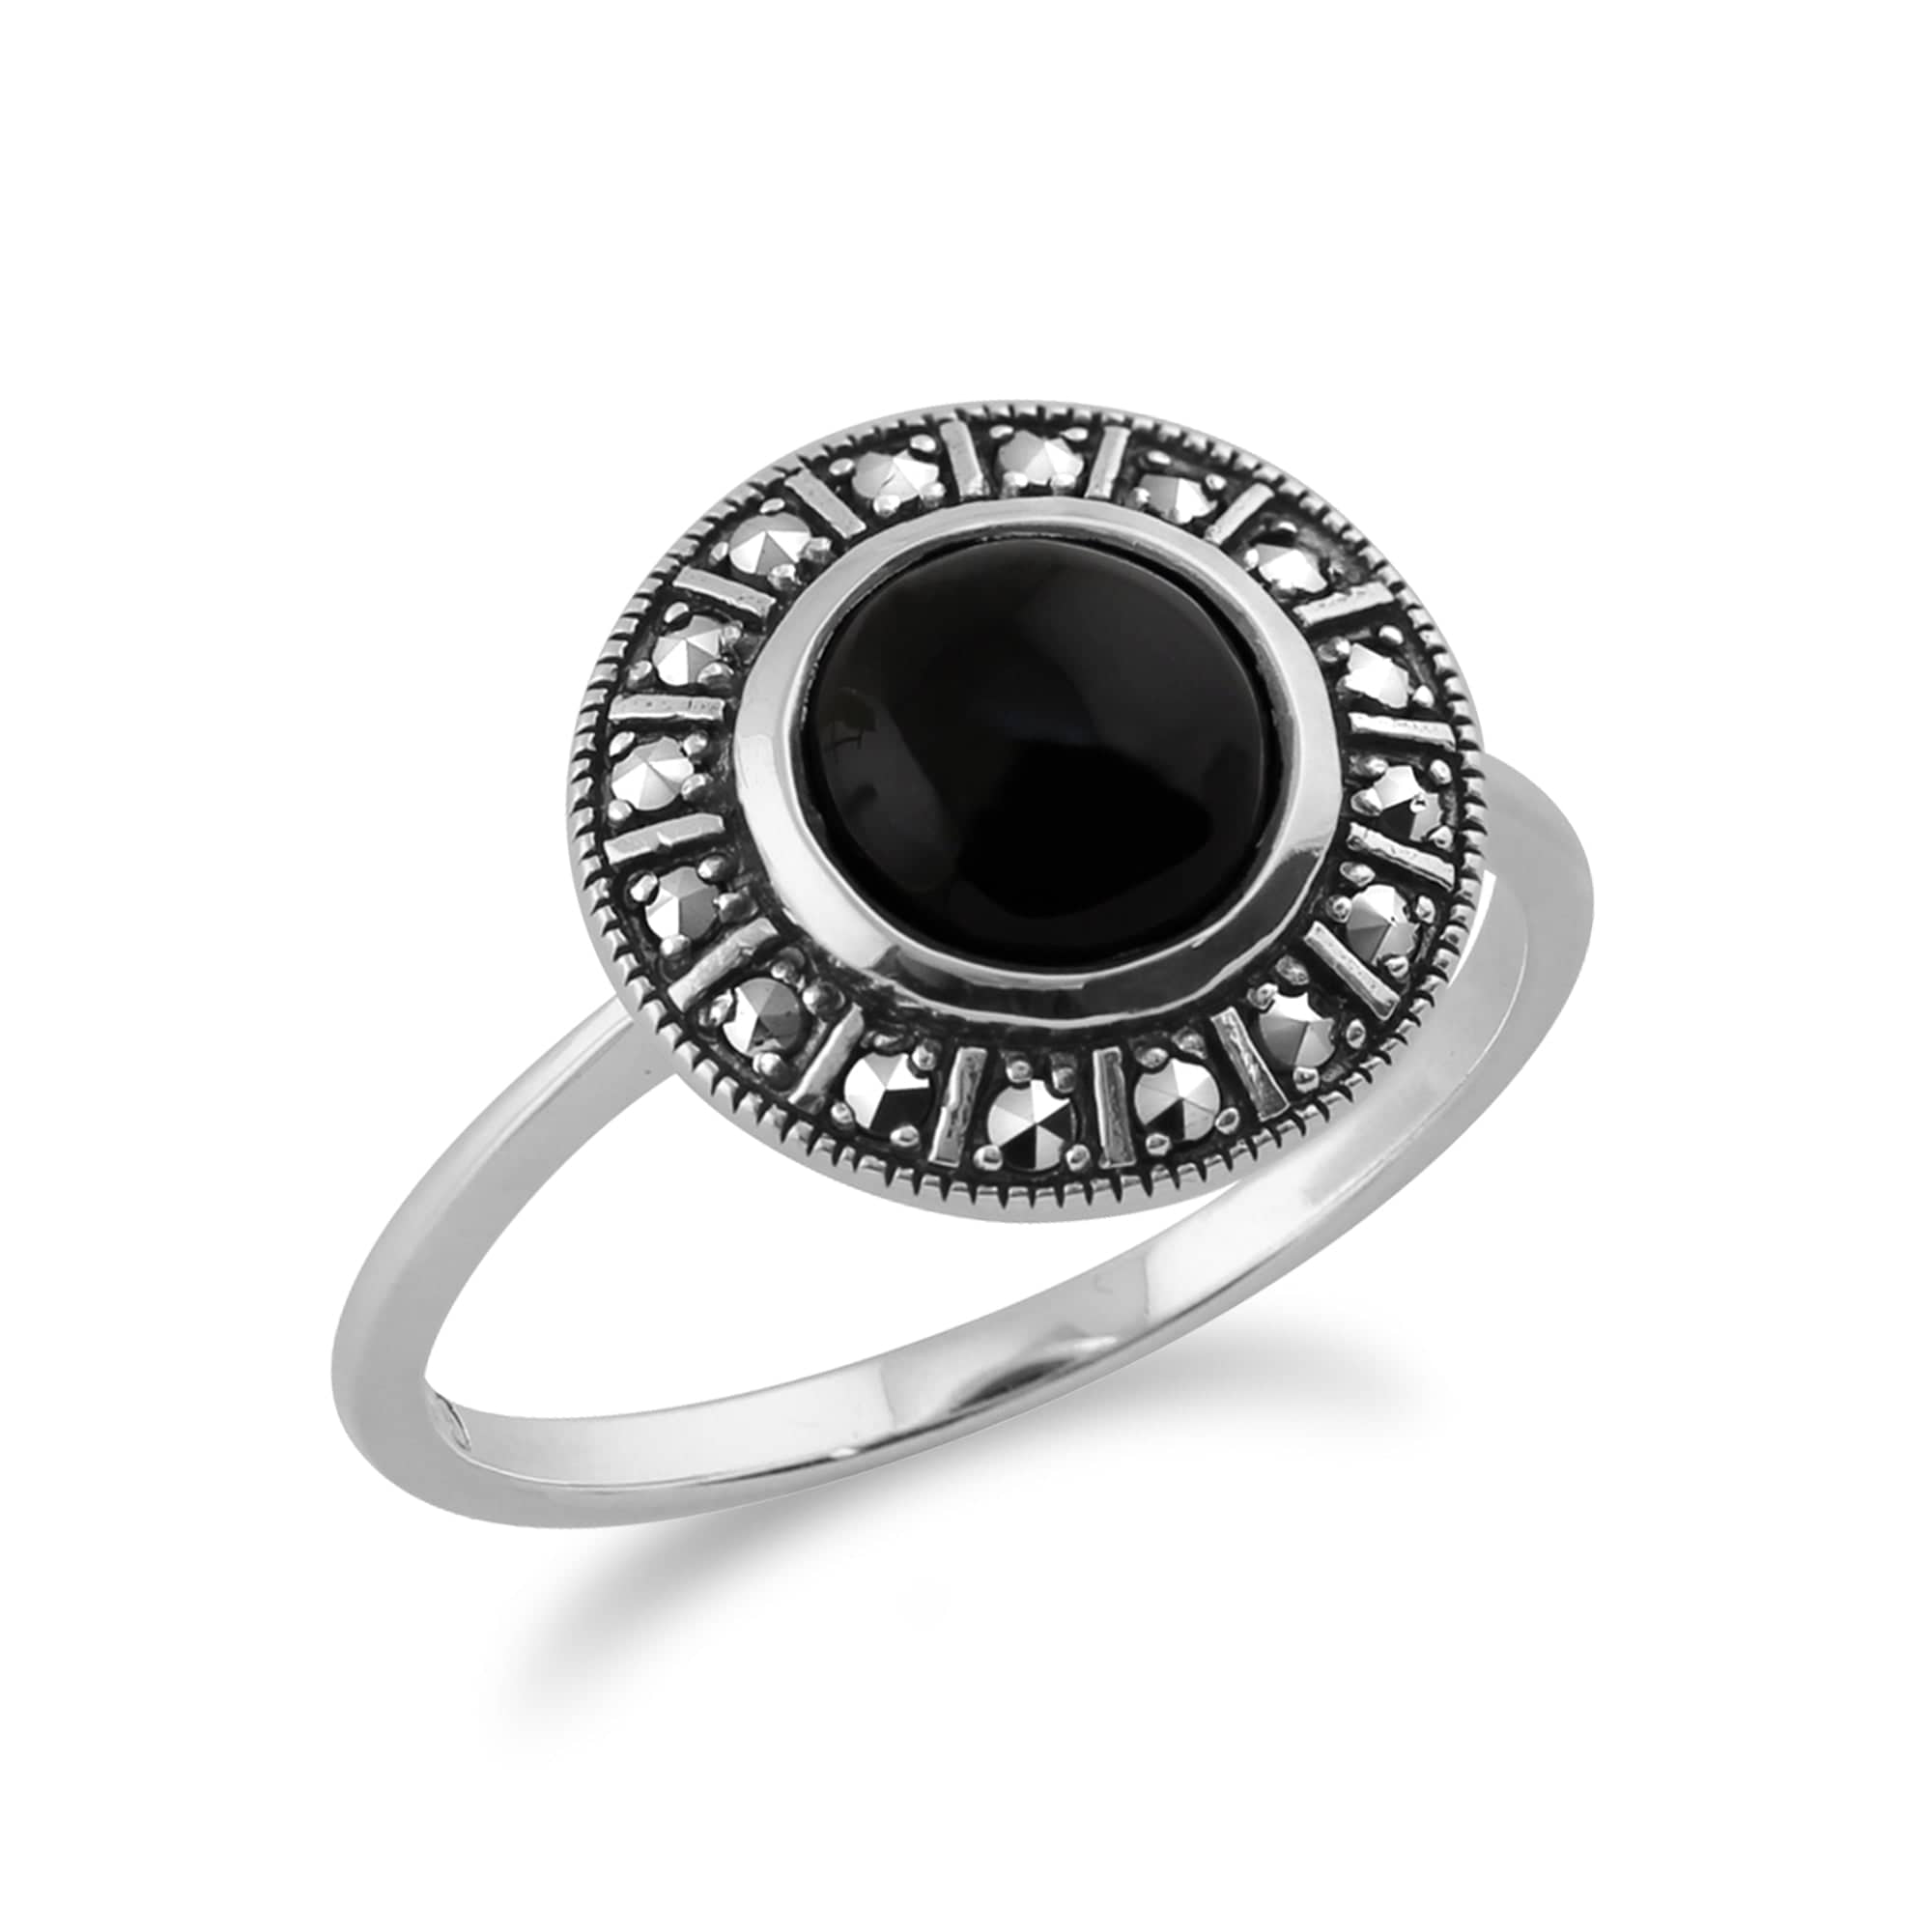 Art Deco Style Round Black Onyx Cabochon & Marcasite Halo Ring in 925 Sterling Silver - Gemondo